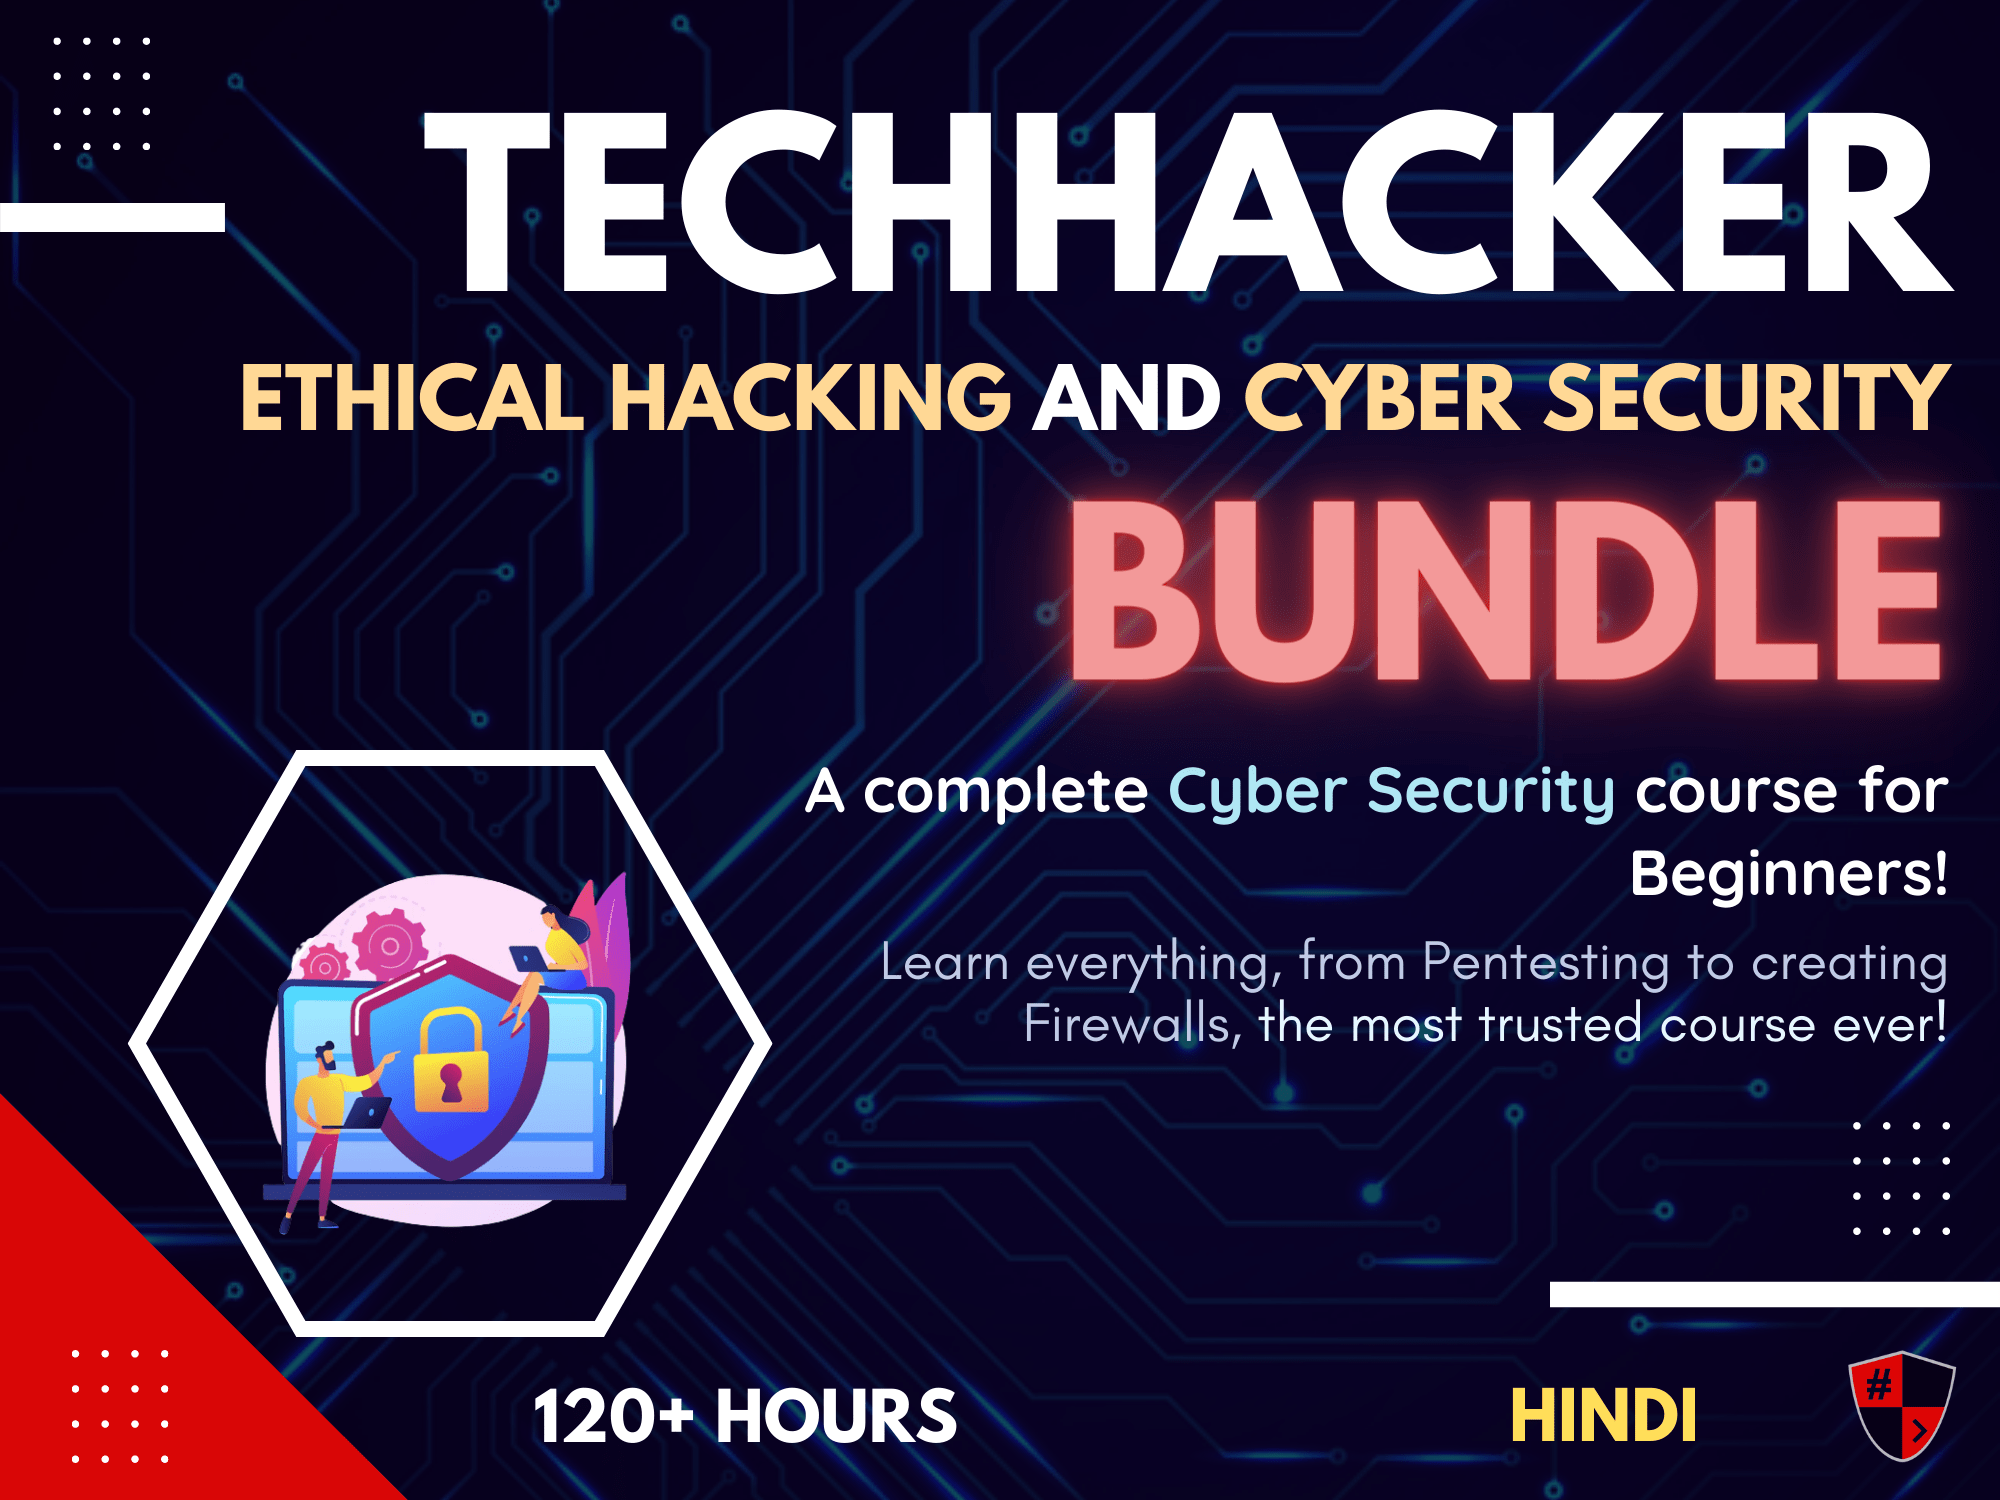 TechHacker Ethical Hacking and Cyber Security Bundle